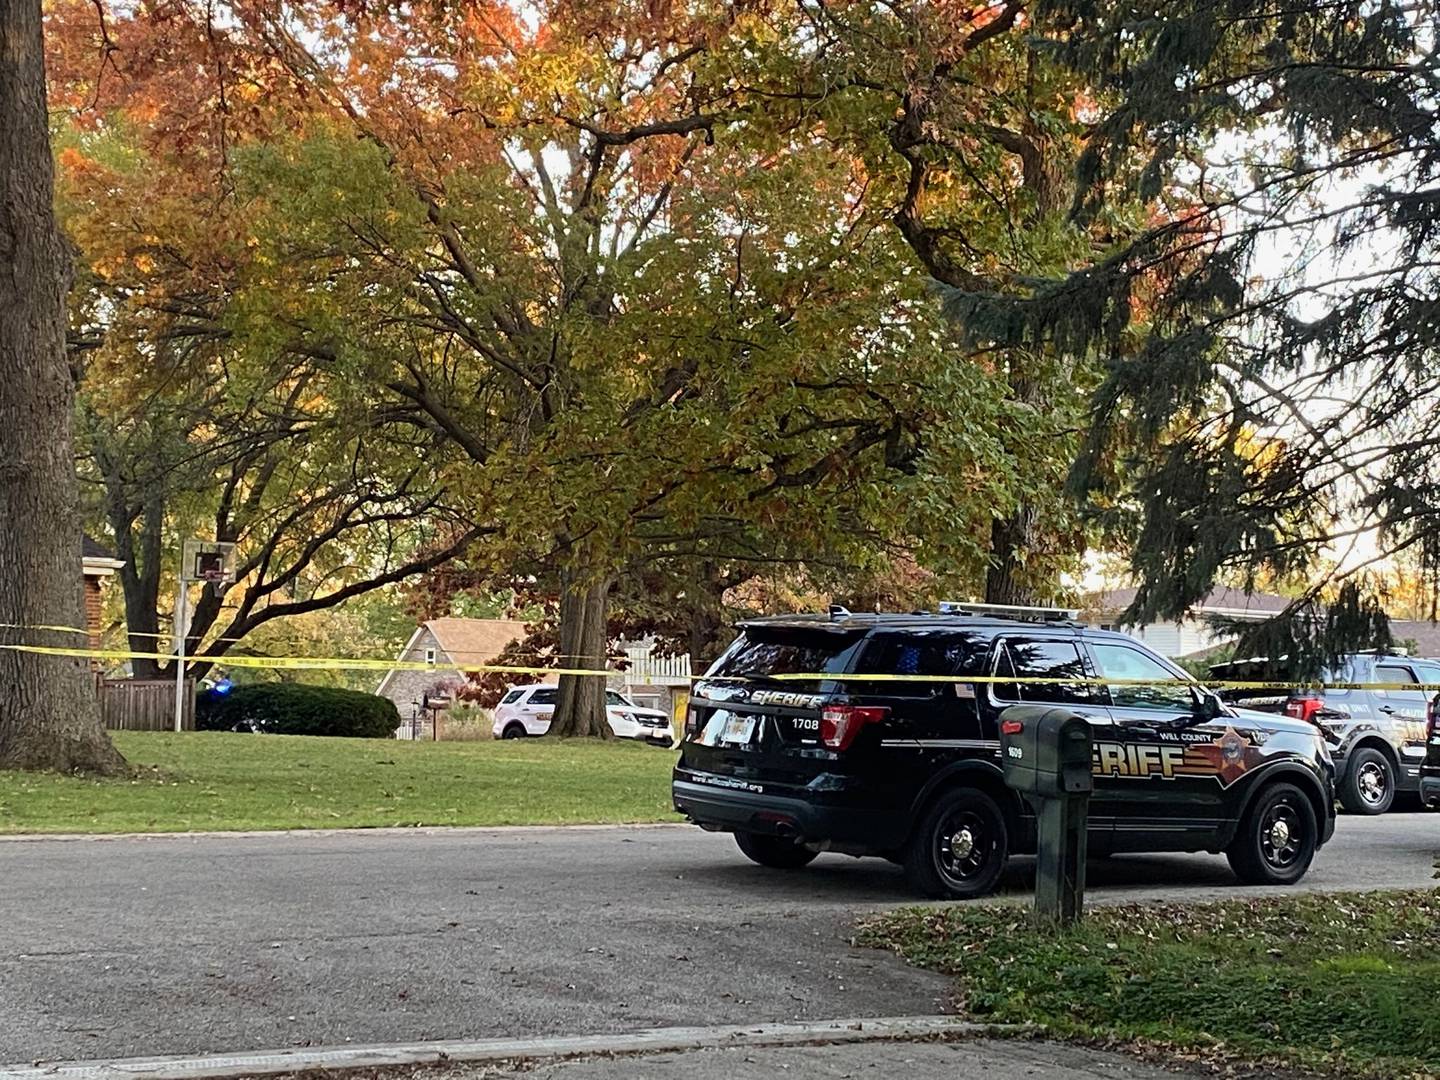 The Will County Sheriff's Office blocked off Middletree Road after deputies gunned down a man as he stabbed his grandfather to death Saturday afternoon, according to police.